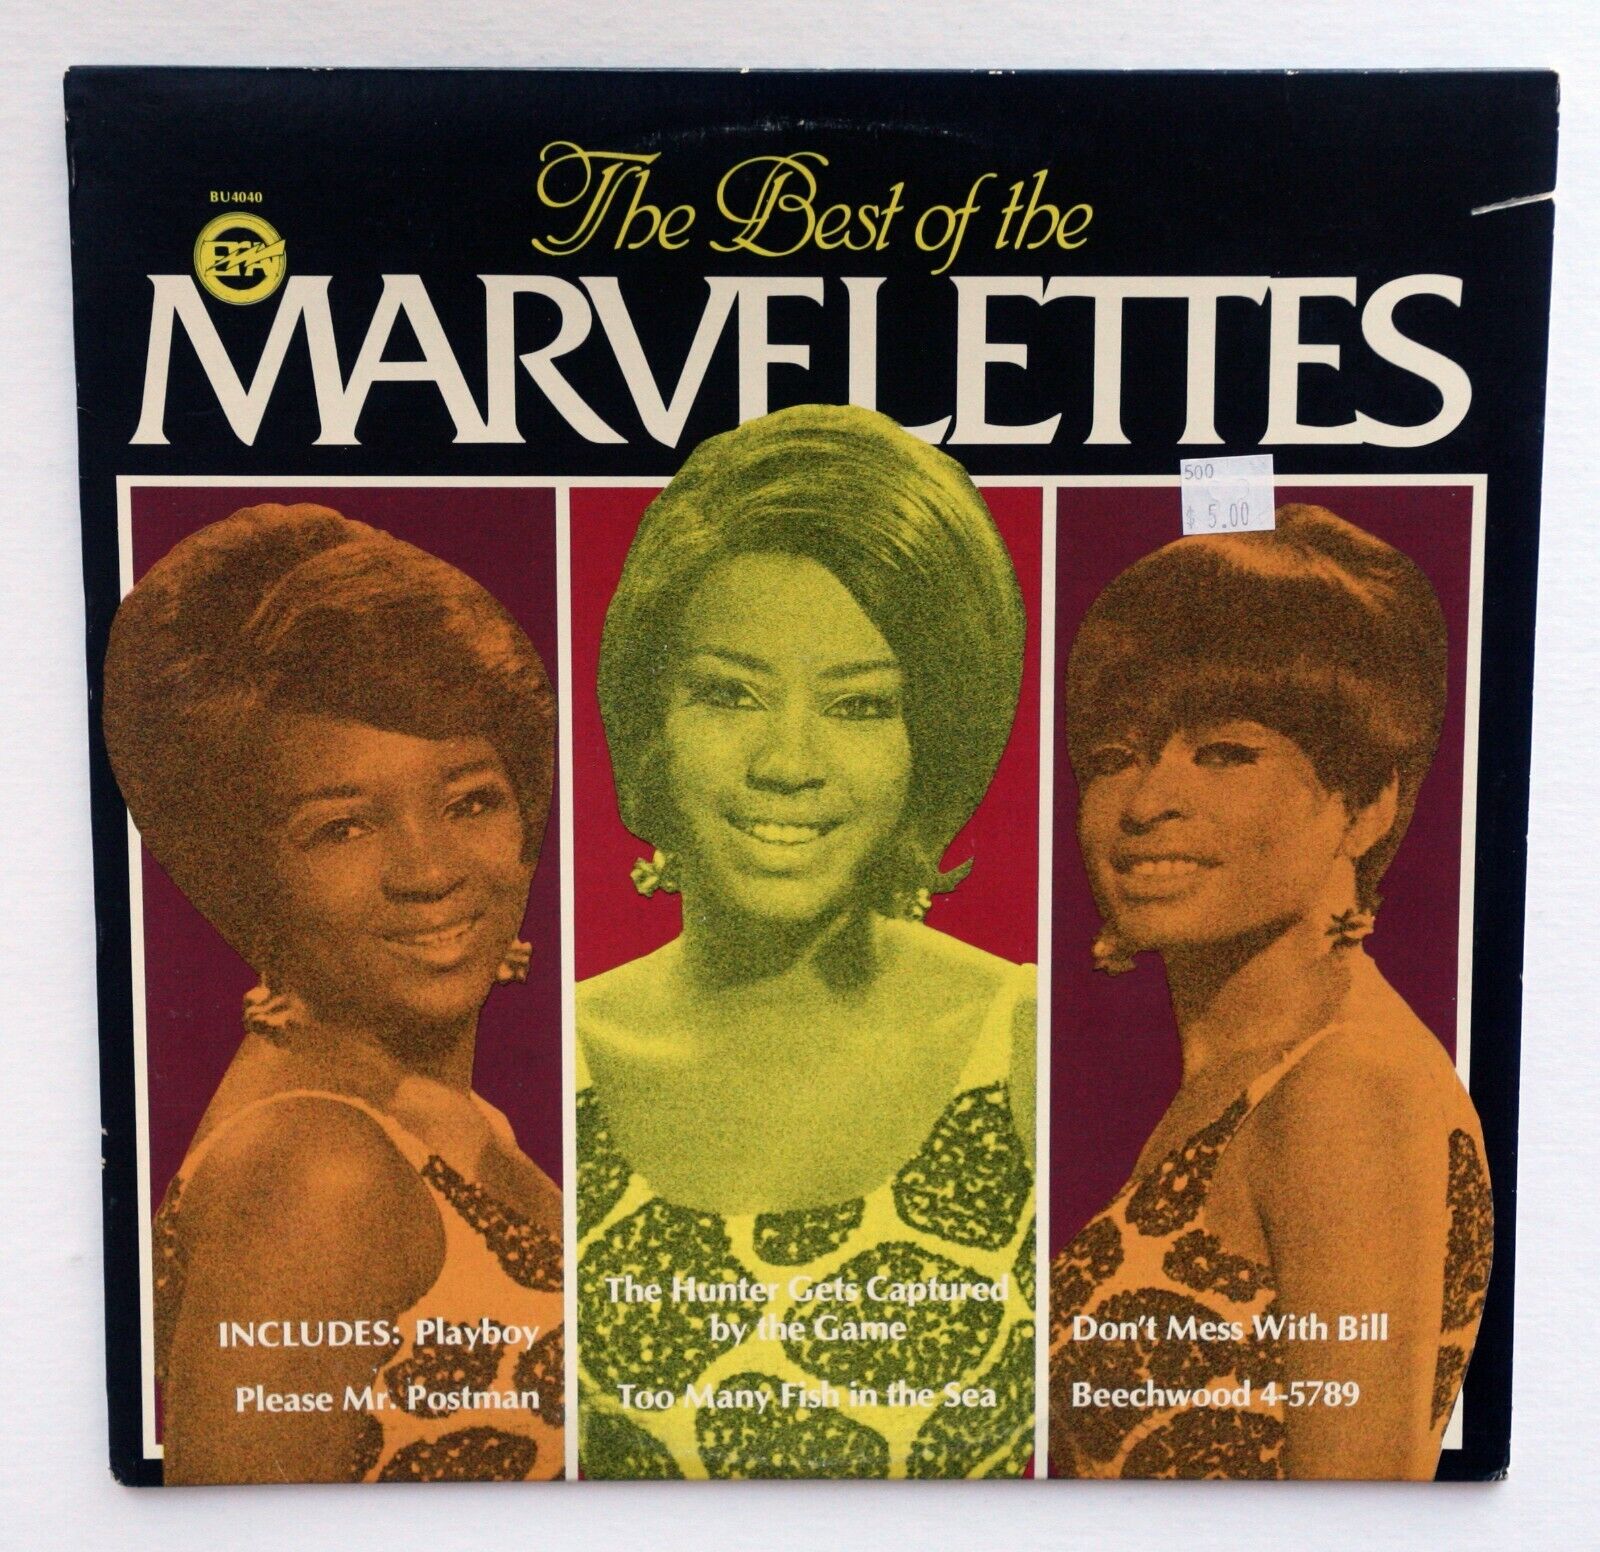 The Marvelettes The Best Of The Marvelettes (EX/VG) 1979 LP Record BU-4040